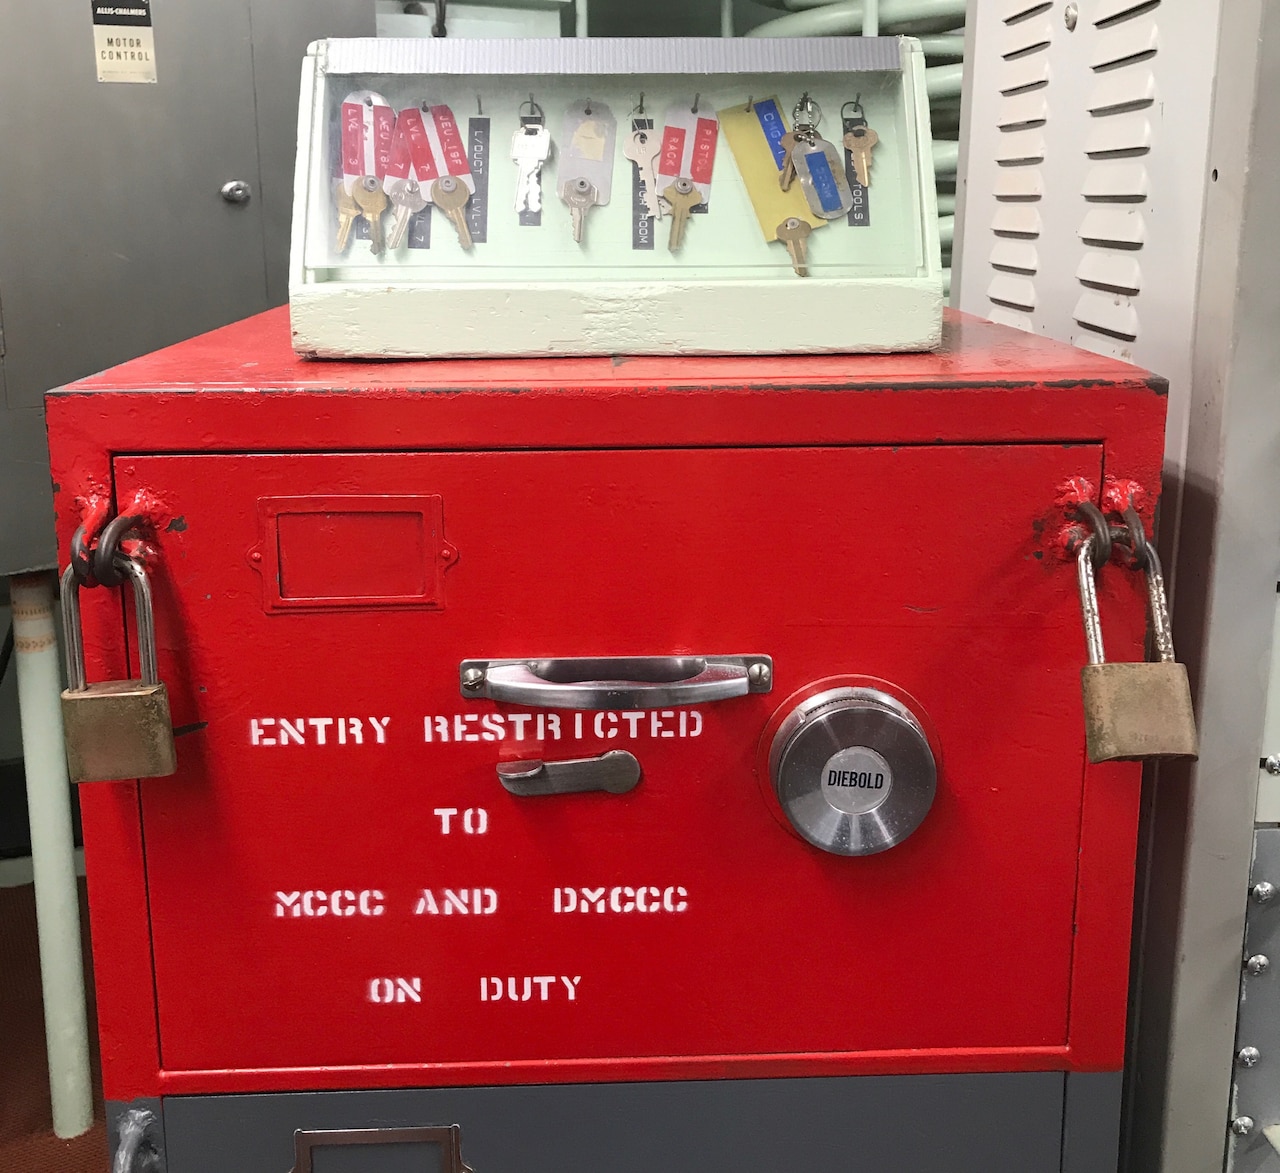 A red padlocked safe inside the launch control center.